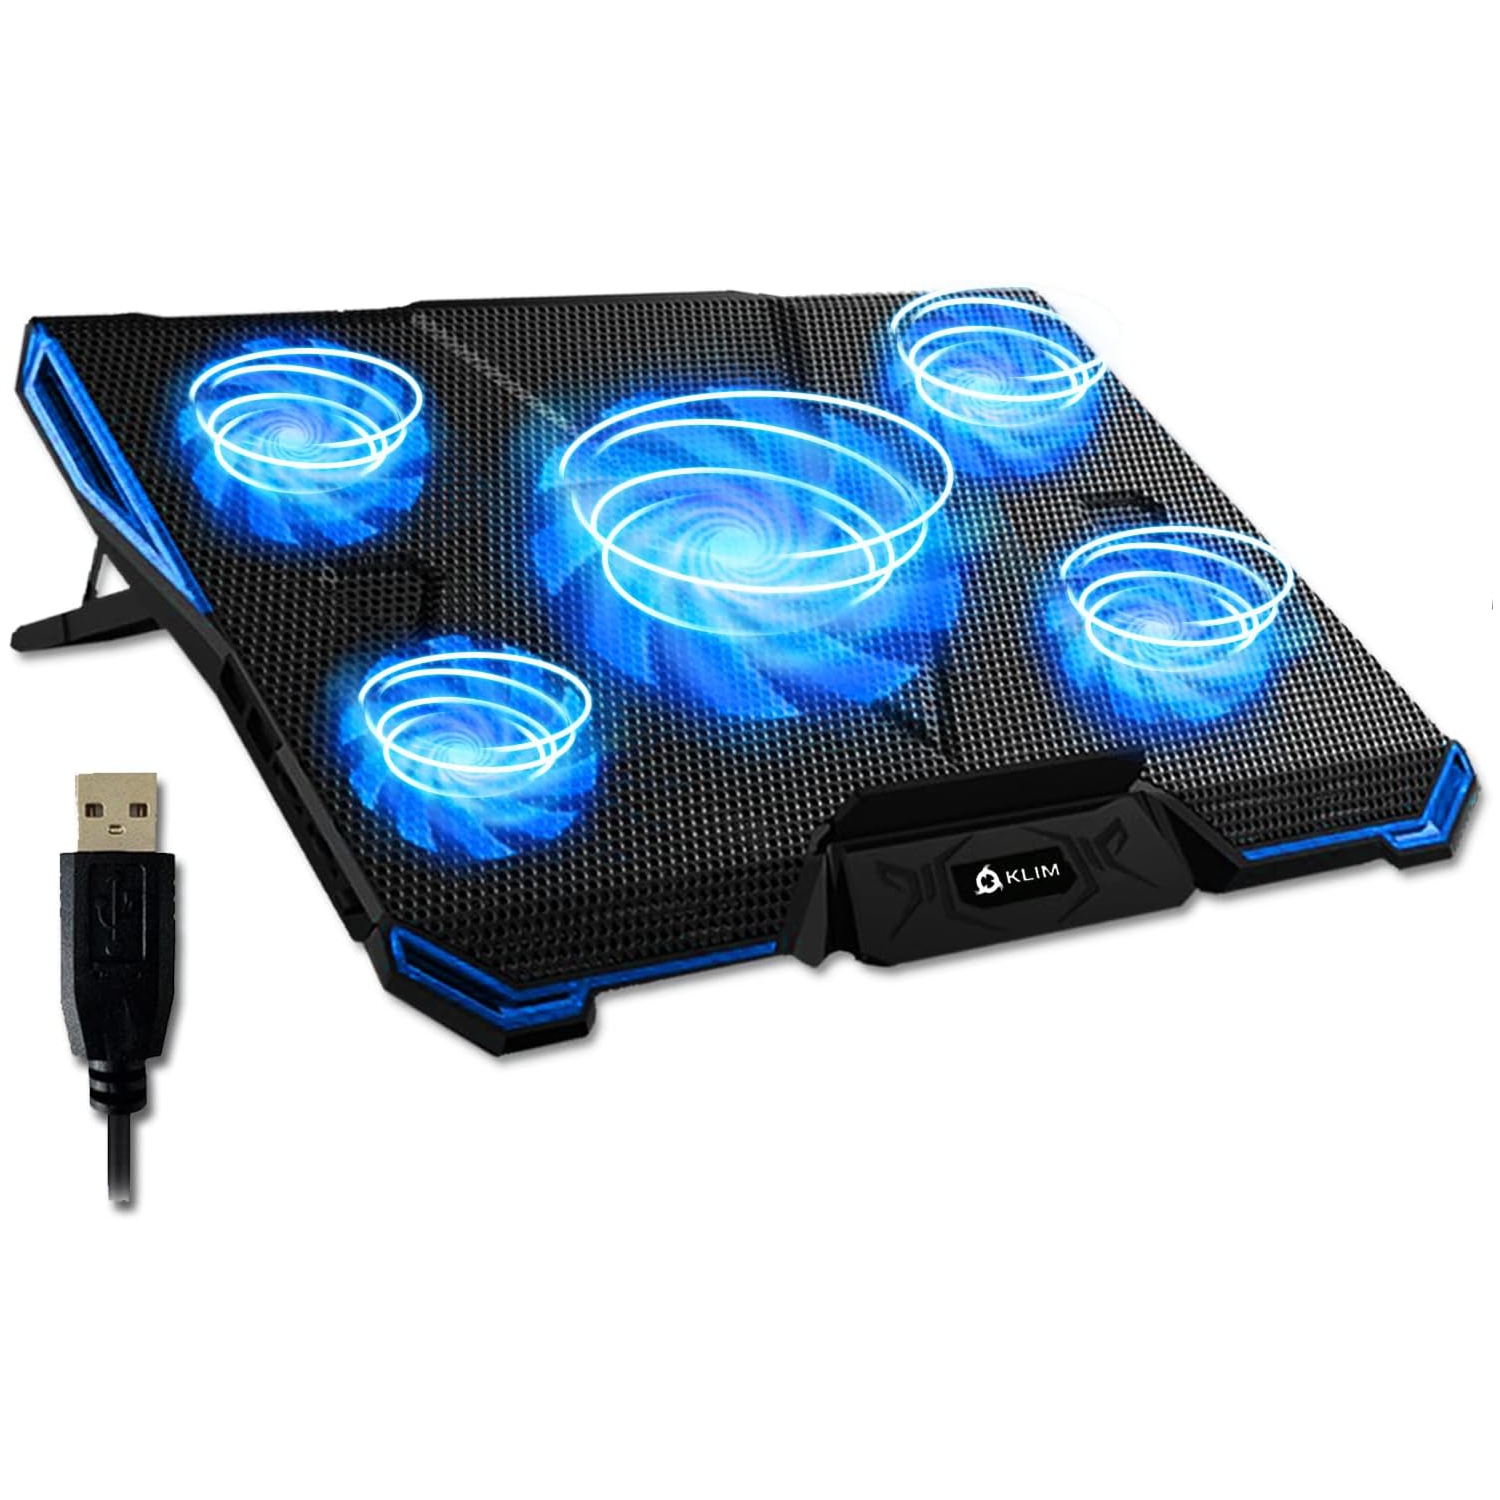 Cyclone Laptop Cooling Pad - New 2023-5 Fans Cooler - No More Overheating - Increases PC Performance and Life Expectancy - Ventilated Support for Laptop PS5 and PS4 - Blue